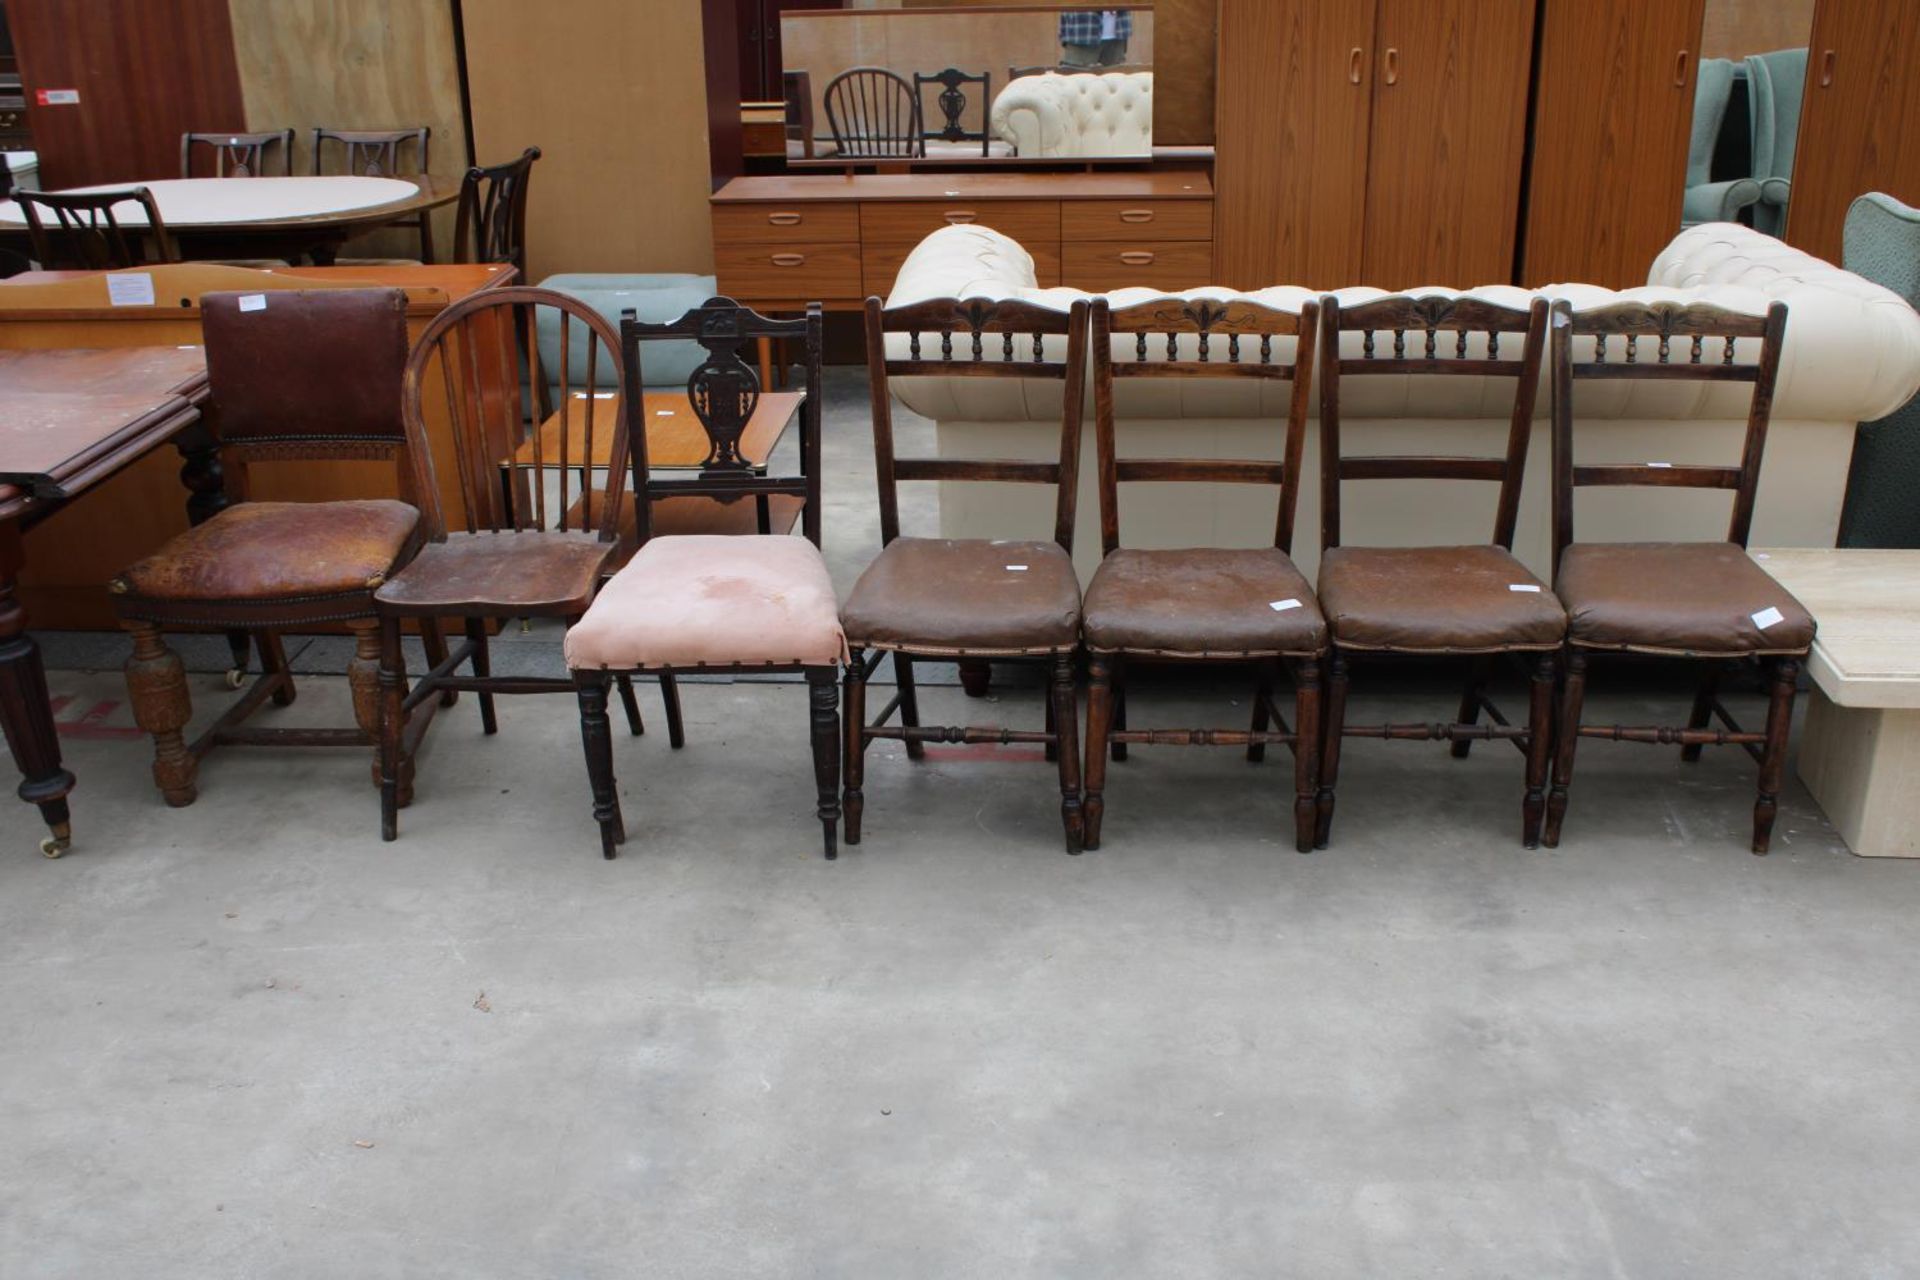 FOUR EDWARDIAN BEECH BEDROOM CHAIRS, A SINGLE BEDROOM CHAIR, AN EARLY 20TH CENTURY OAK DINING CHAIR,